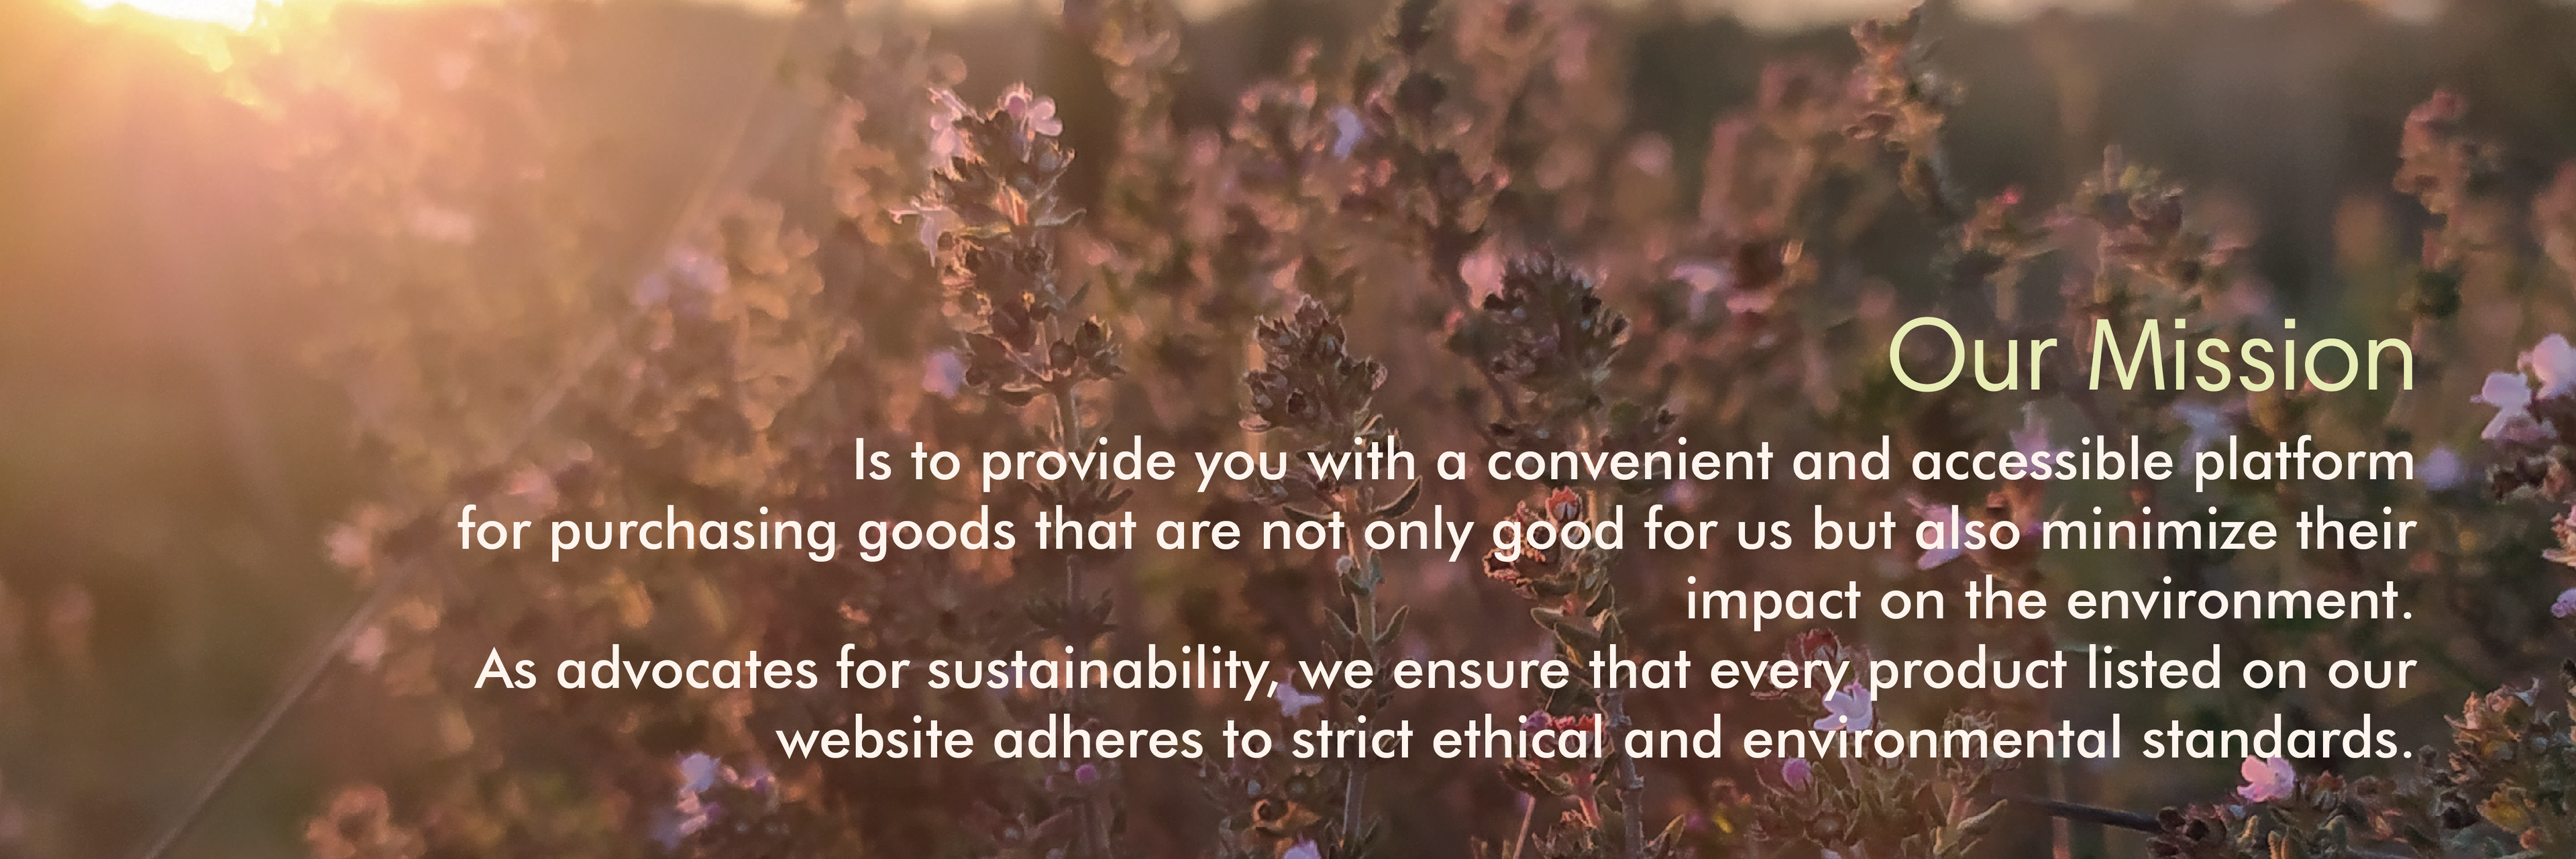 Our mission is to provide you with a convenient and accessible platform  for purchasing goods that are not only good for us but also minimize their impact on the environment. As advocates for sustainability, we ensure that every product listed on our website adheres to strict ethical and environmental standards.